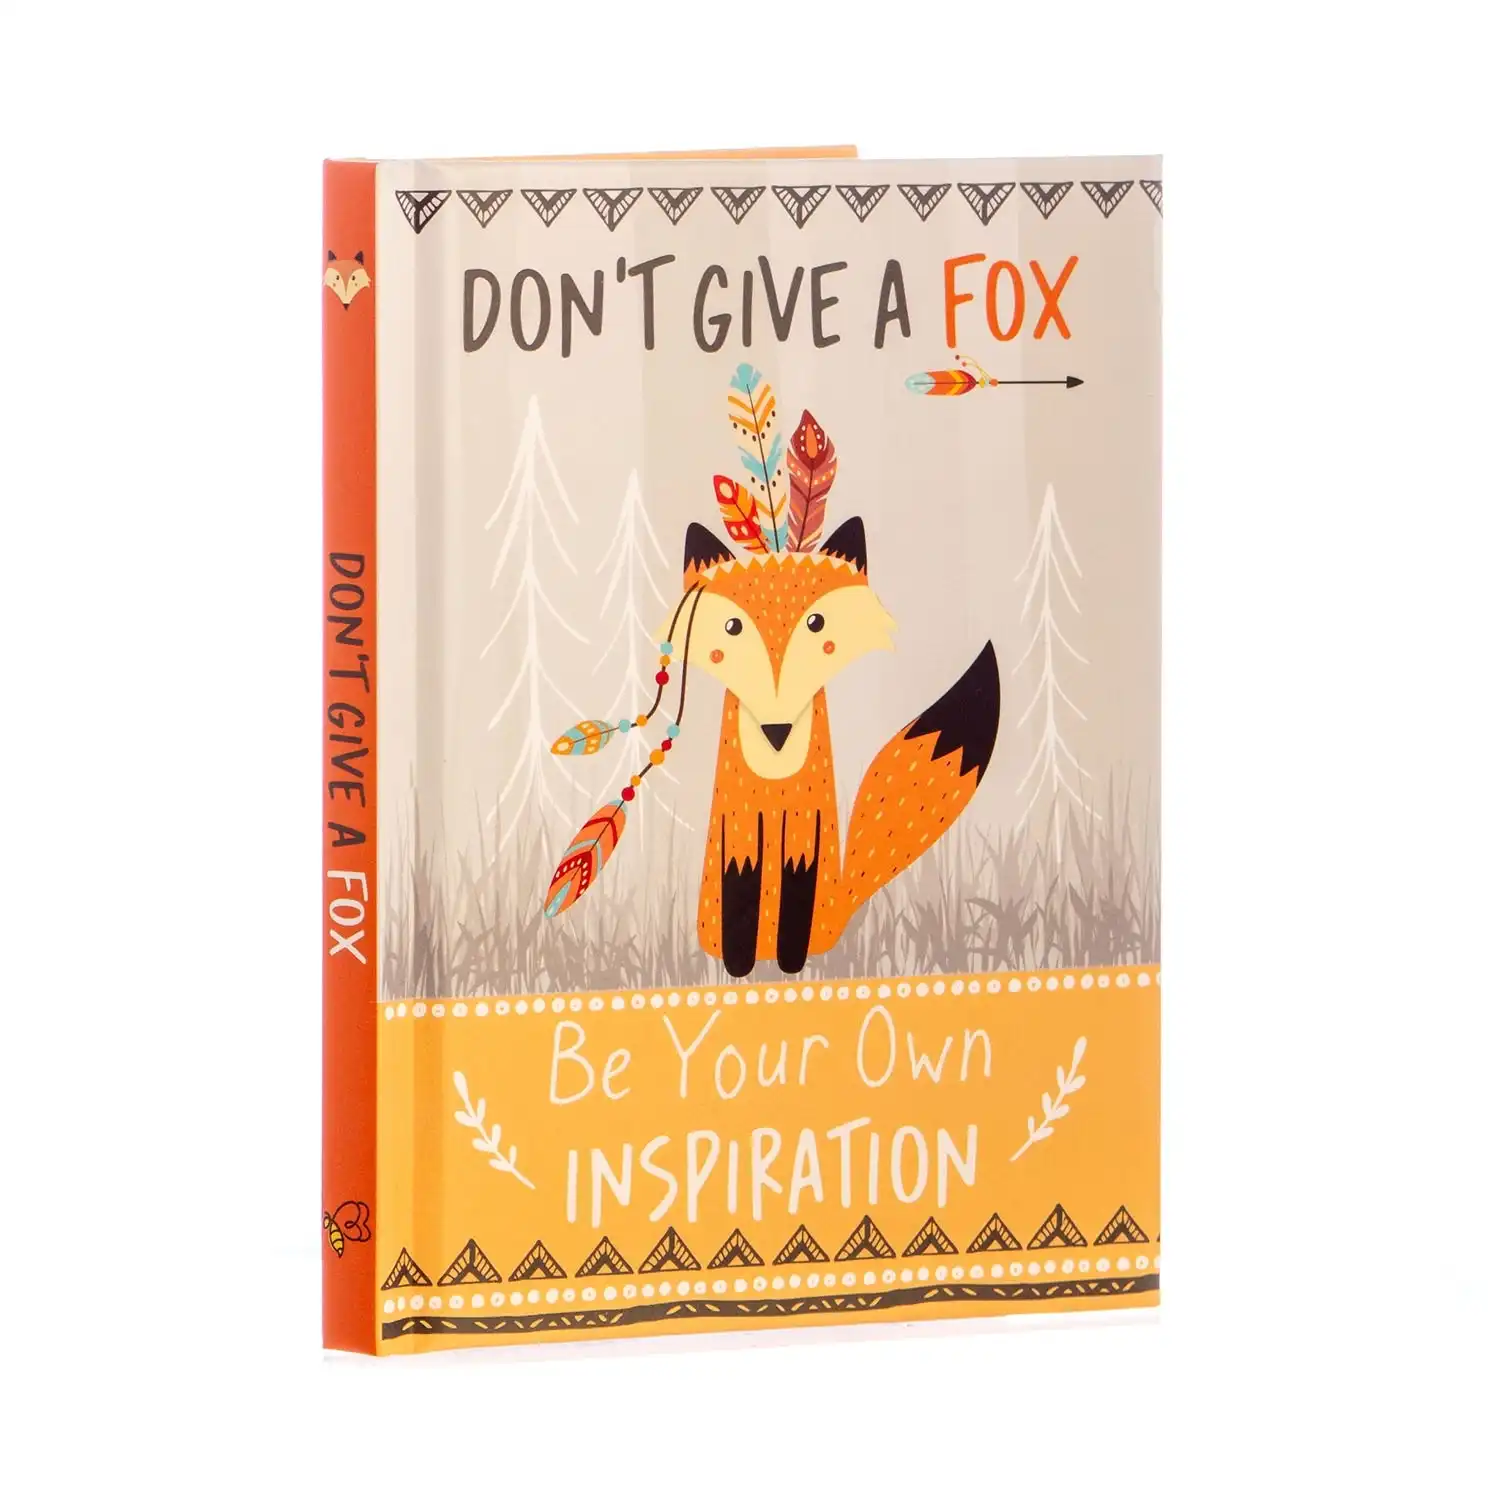 Don't Give a Fox - Inspiration